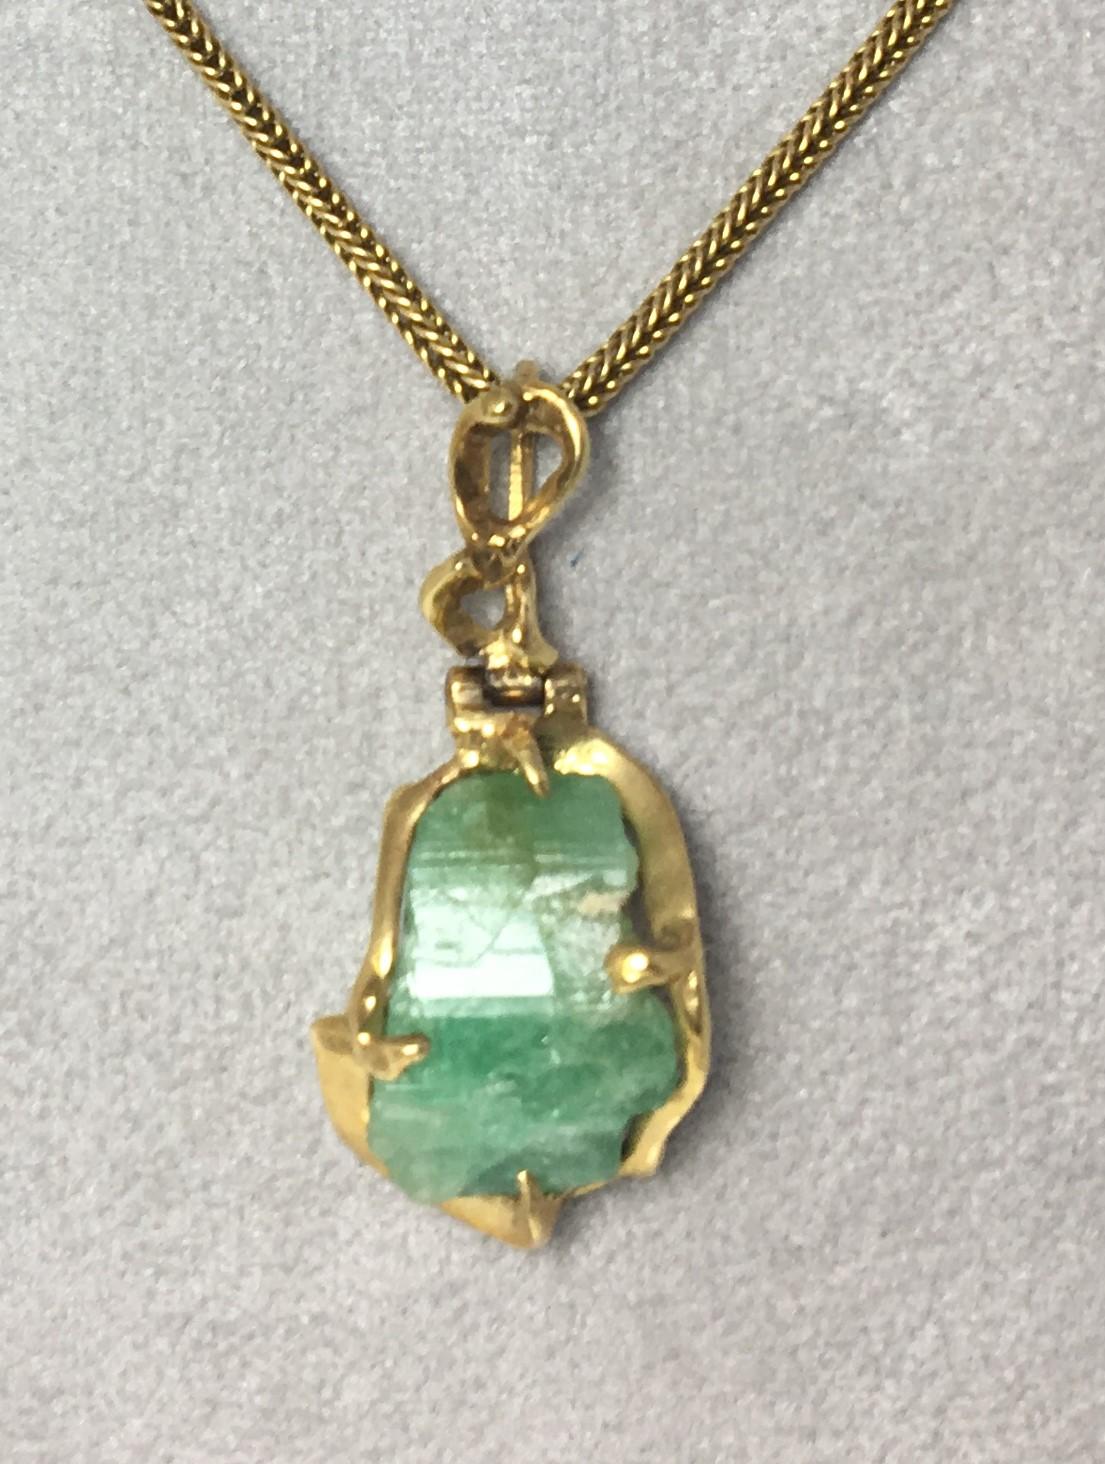 This one-of-a-kind emerald pendant with a custom made 18 karat yellow gold mounting makes a statement.
Rough Cut Emerald approximately 10mm by 20mm.